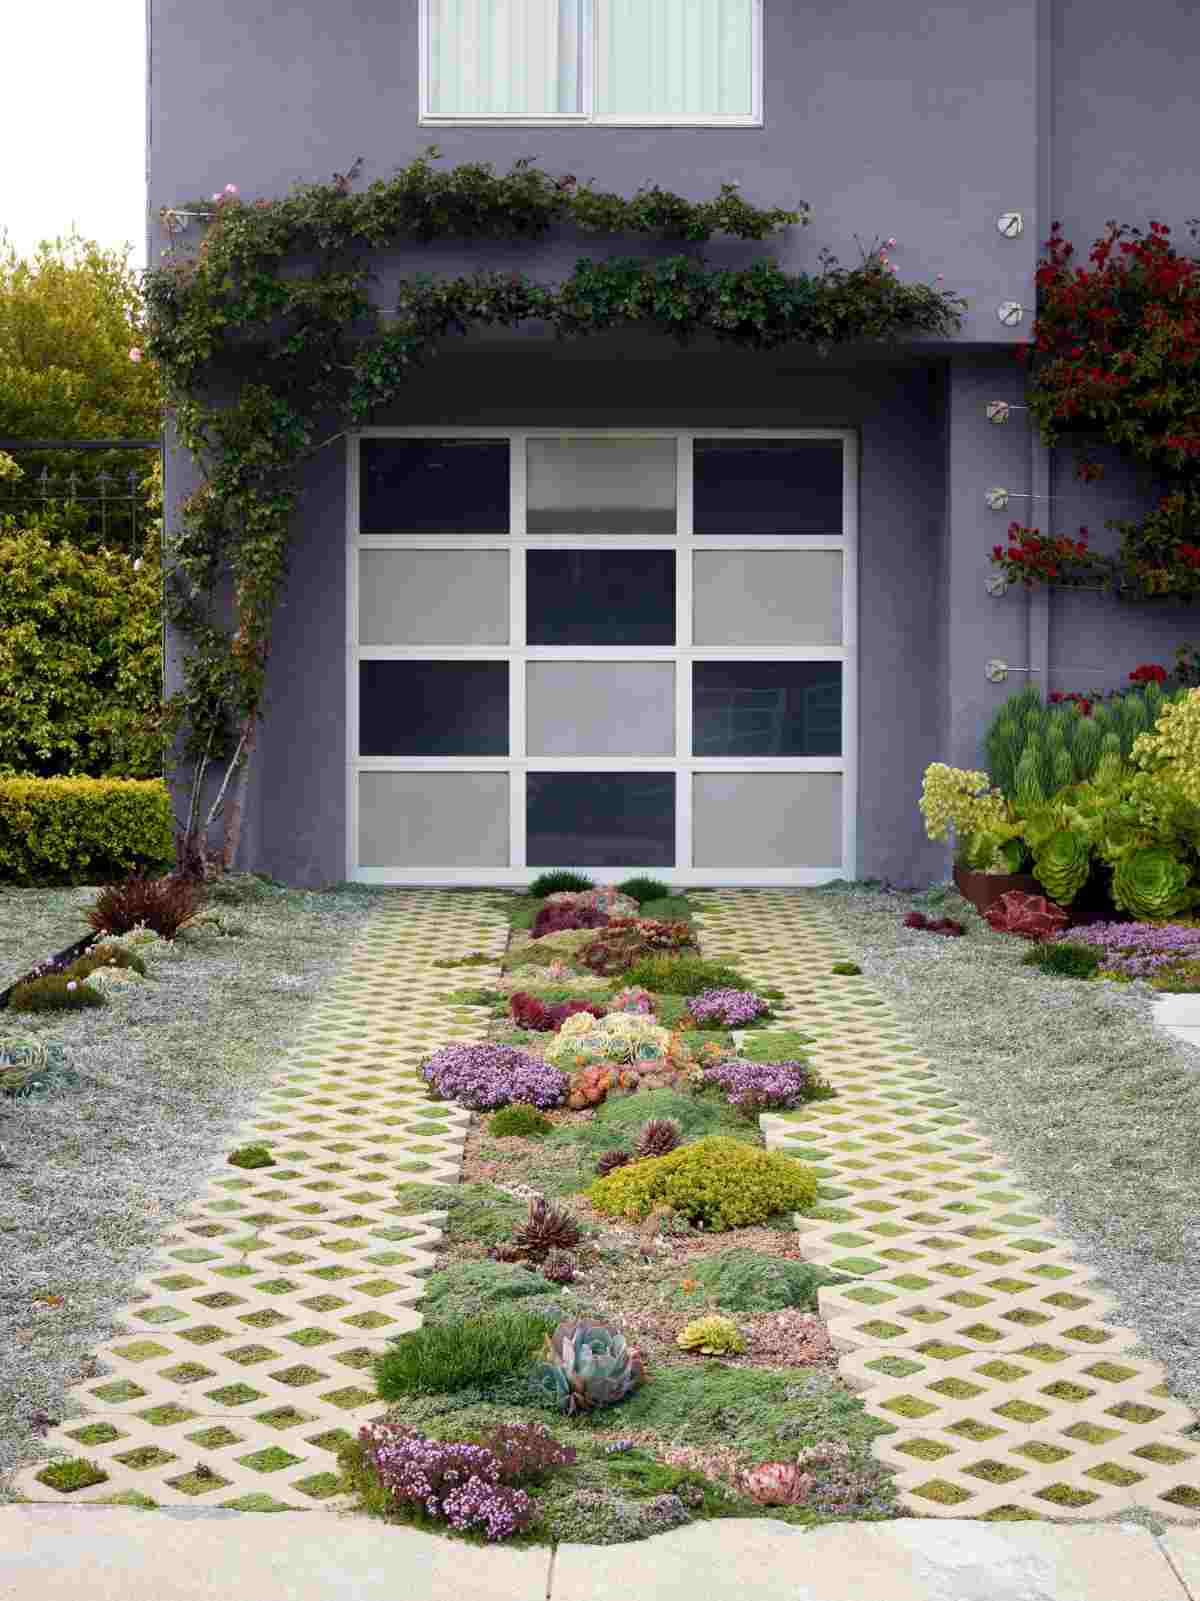 garage entrance in the garden beautifully designed with succulent and climbing plants and house facade